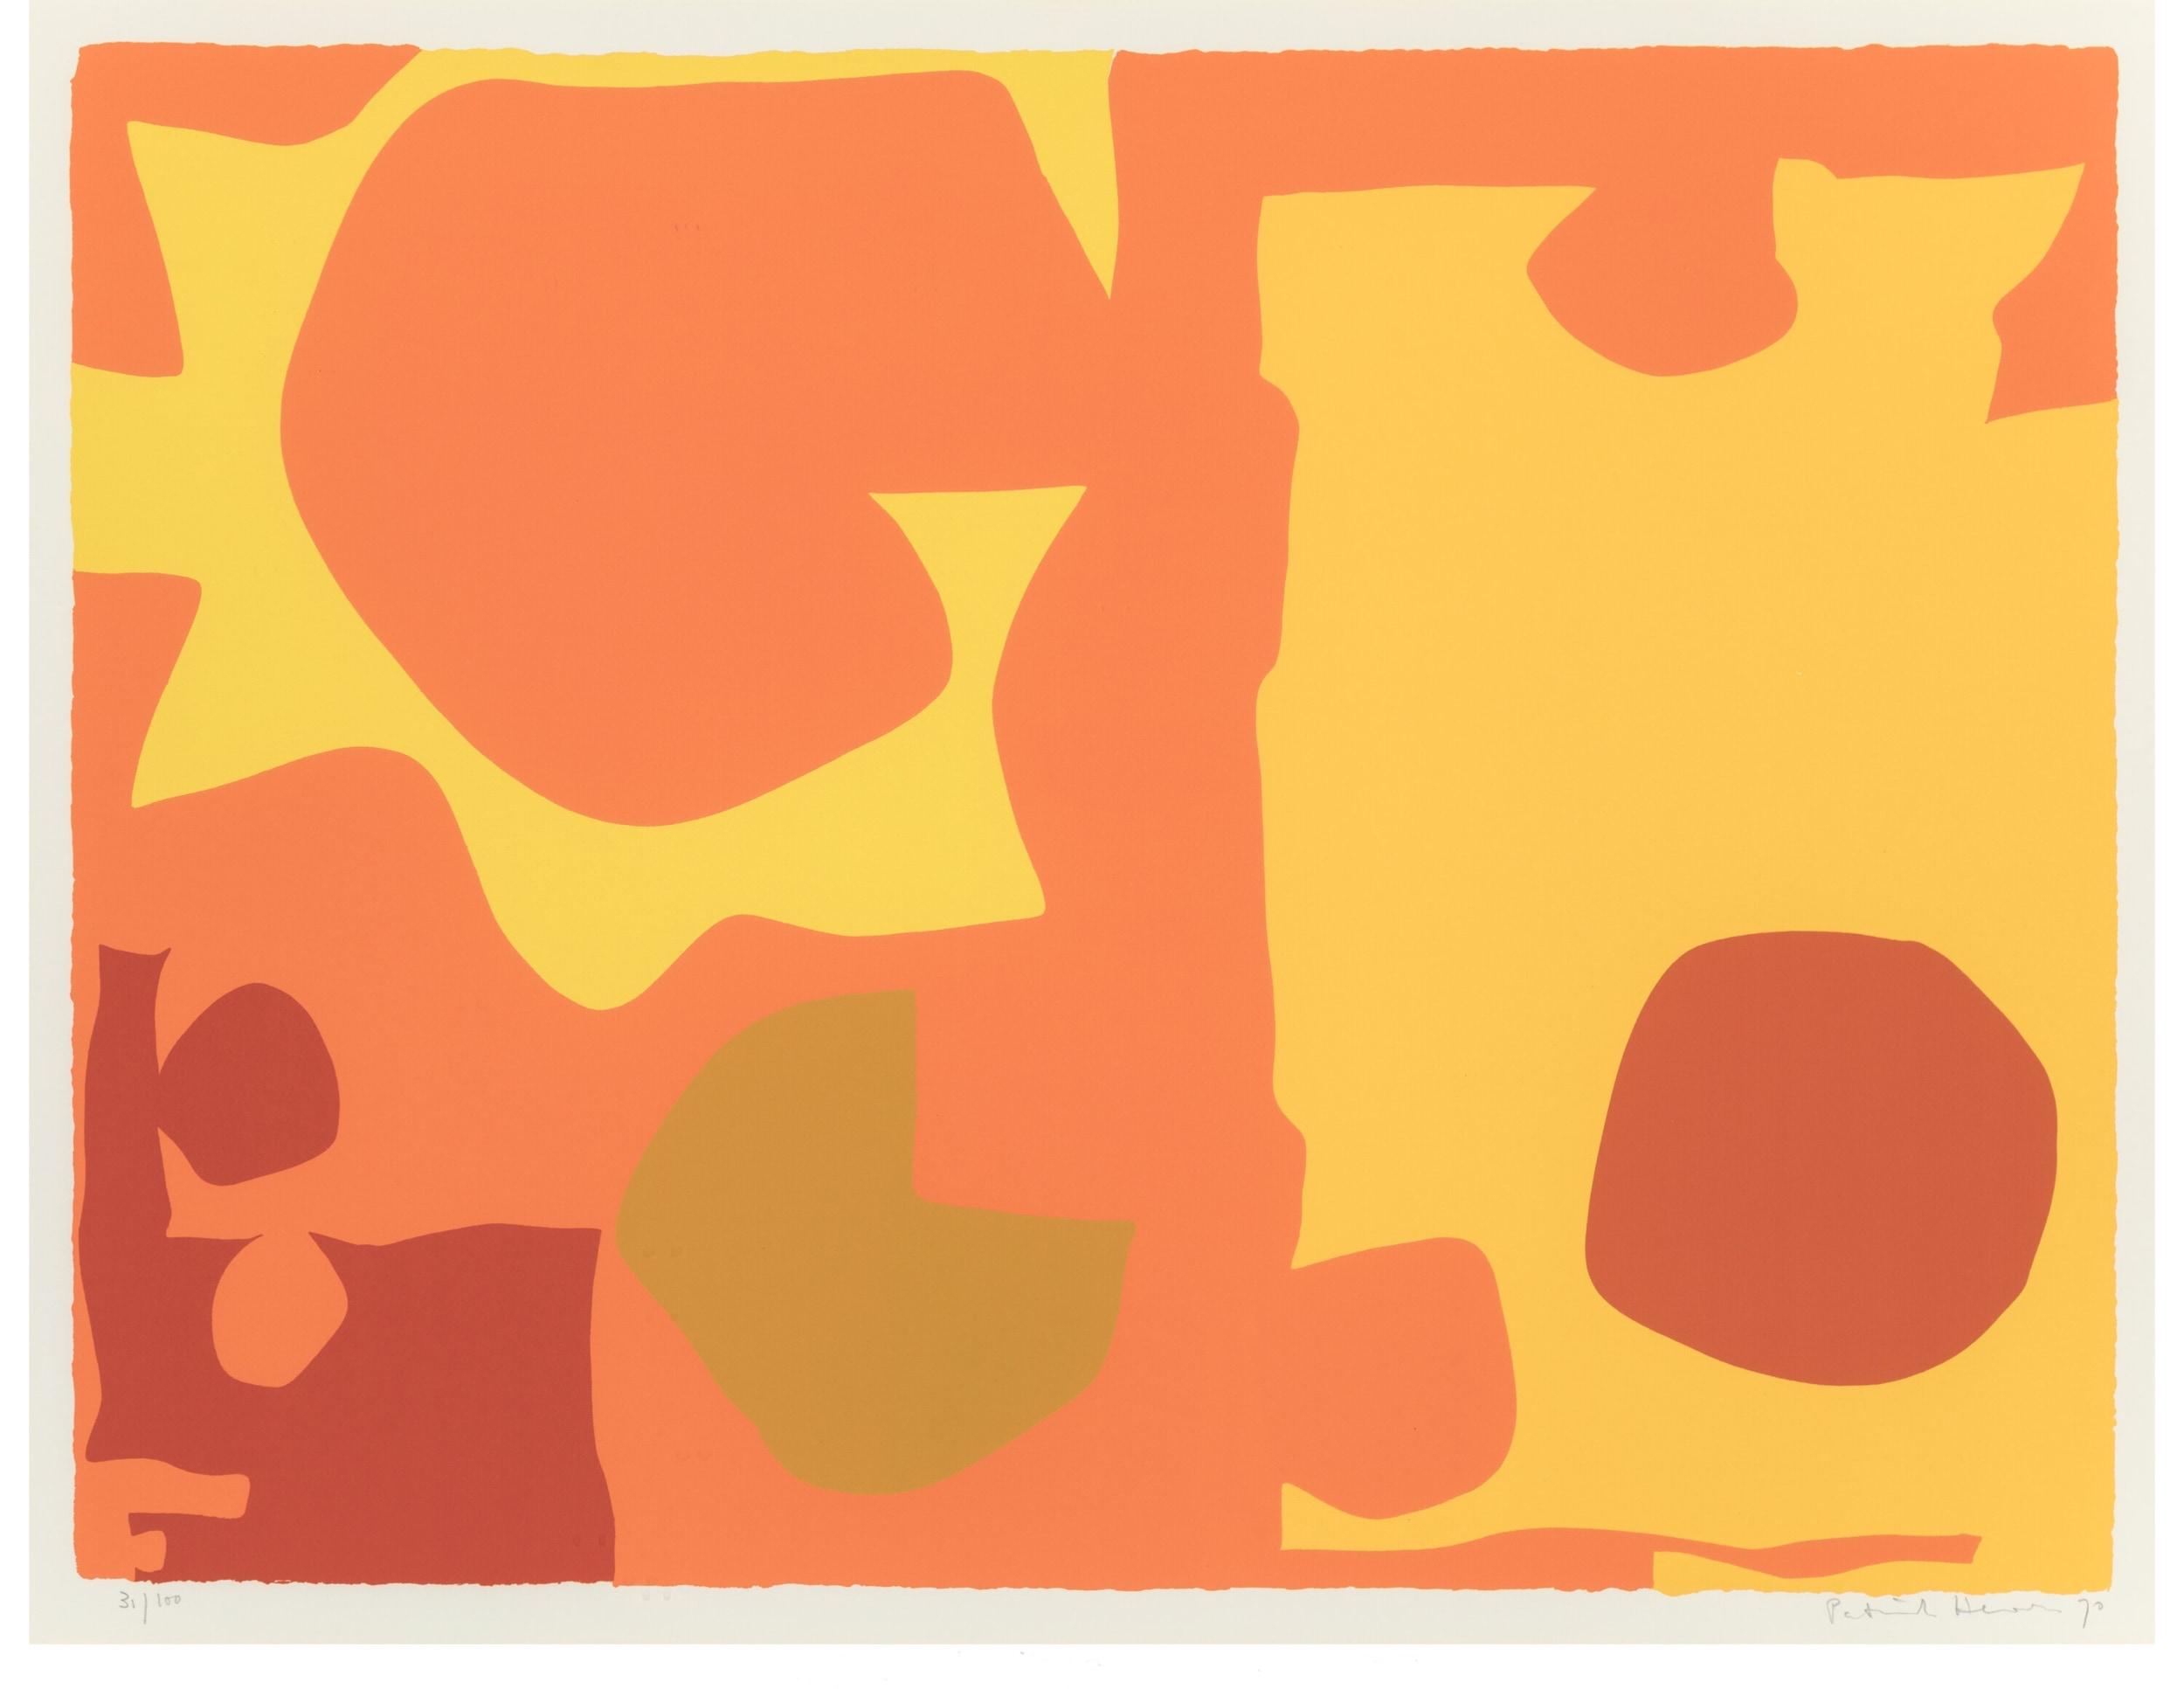 Patrick Heron - Six in Light Orange with Red and Yellow (April 1970)